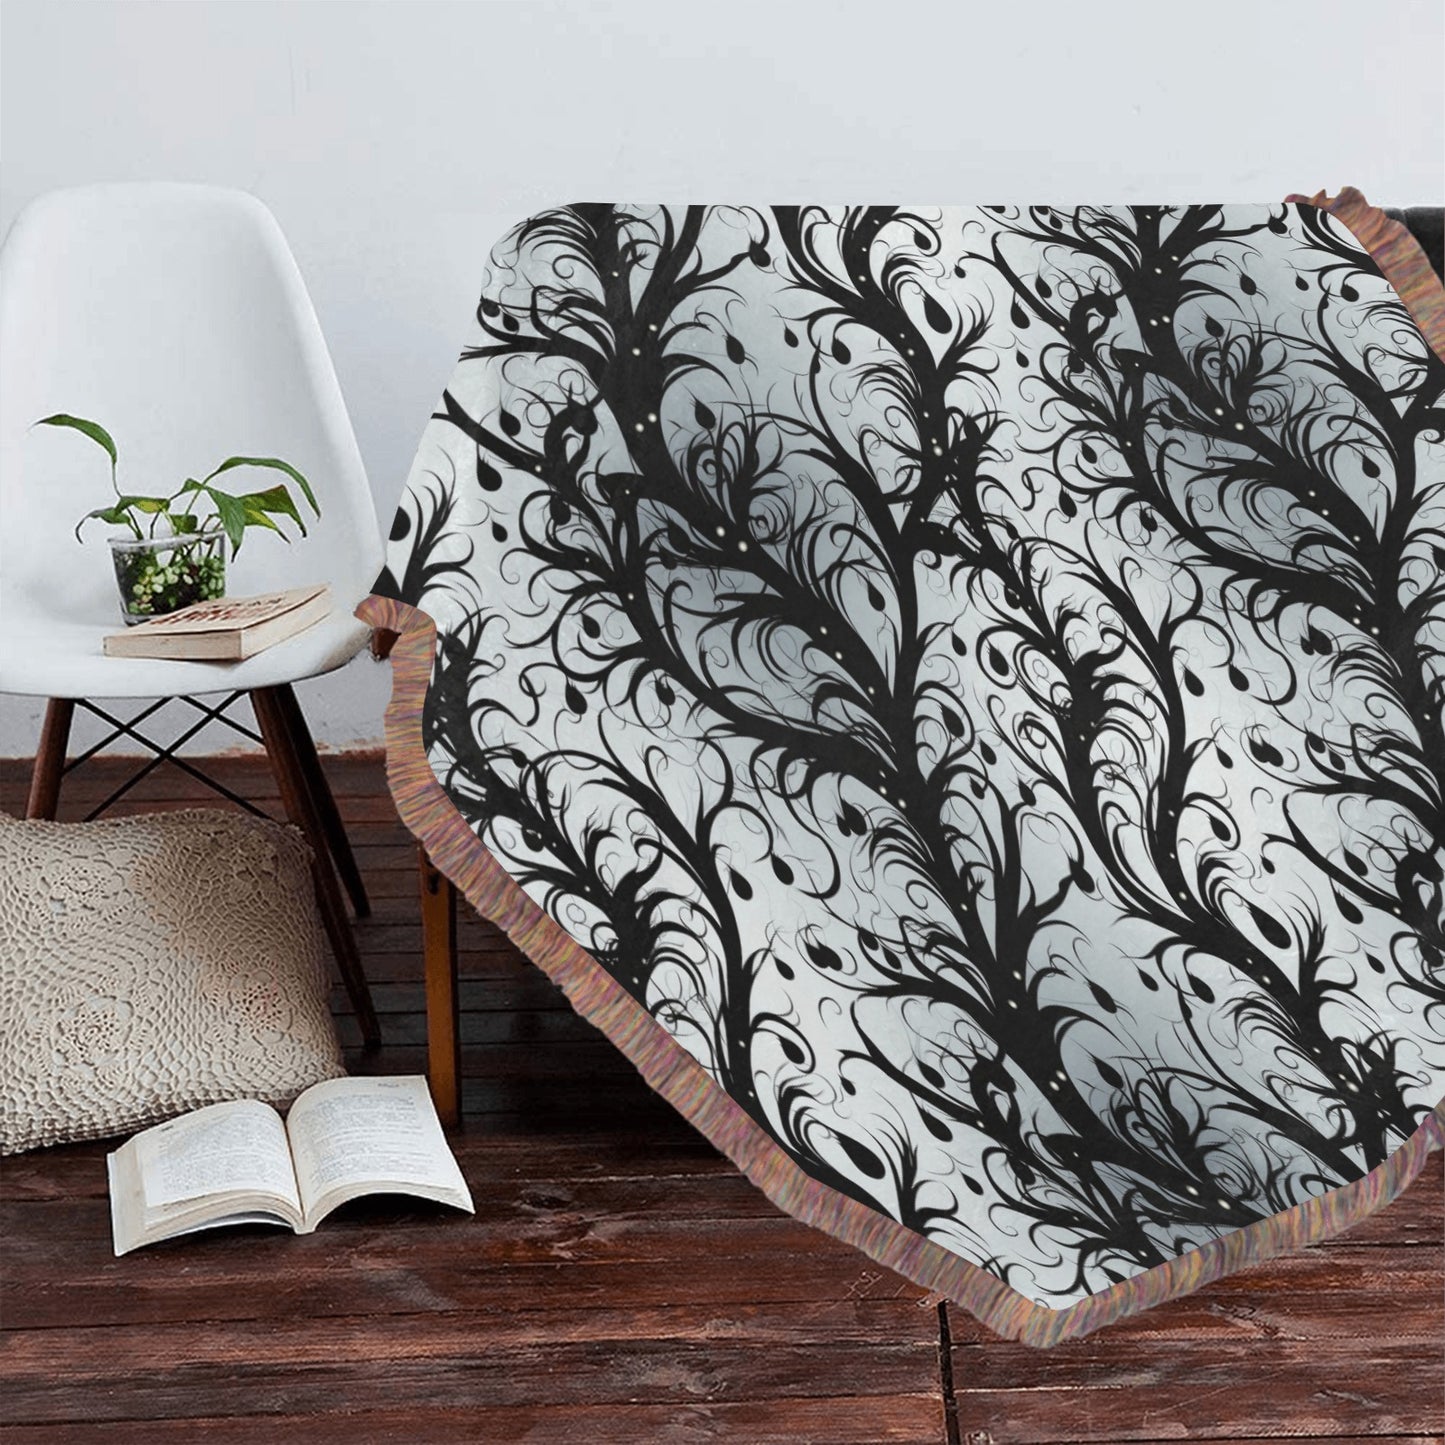 Vines Of Darkness Ultra-Soft Mixed Fringe Blanket (60x80 inch)